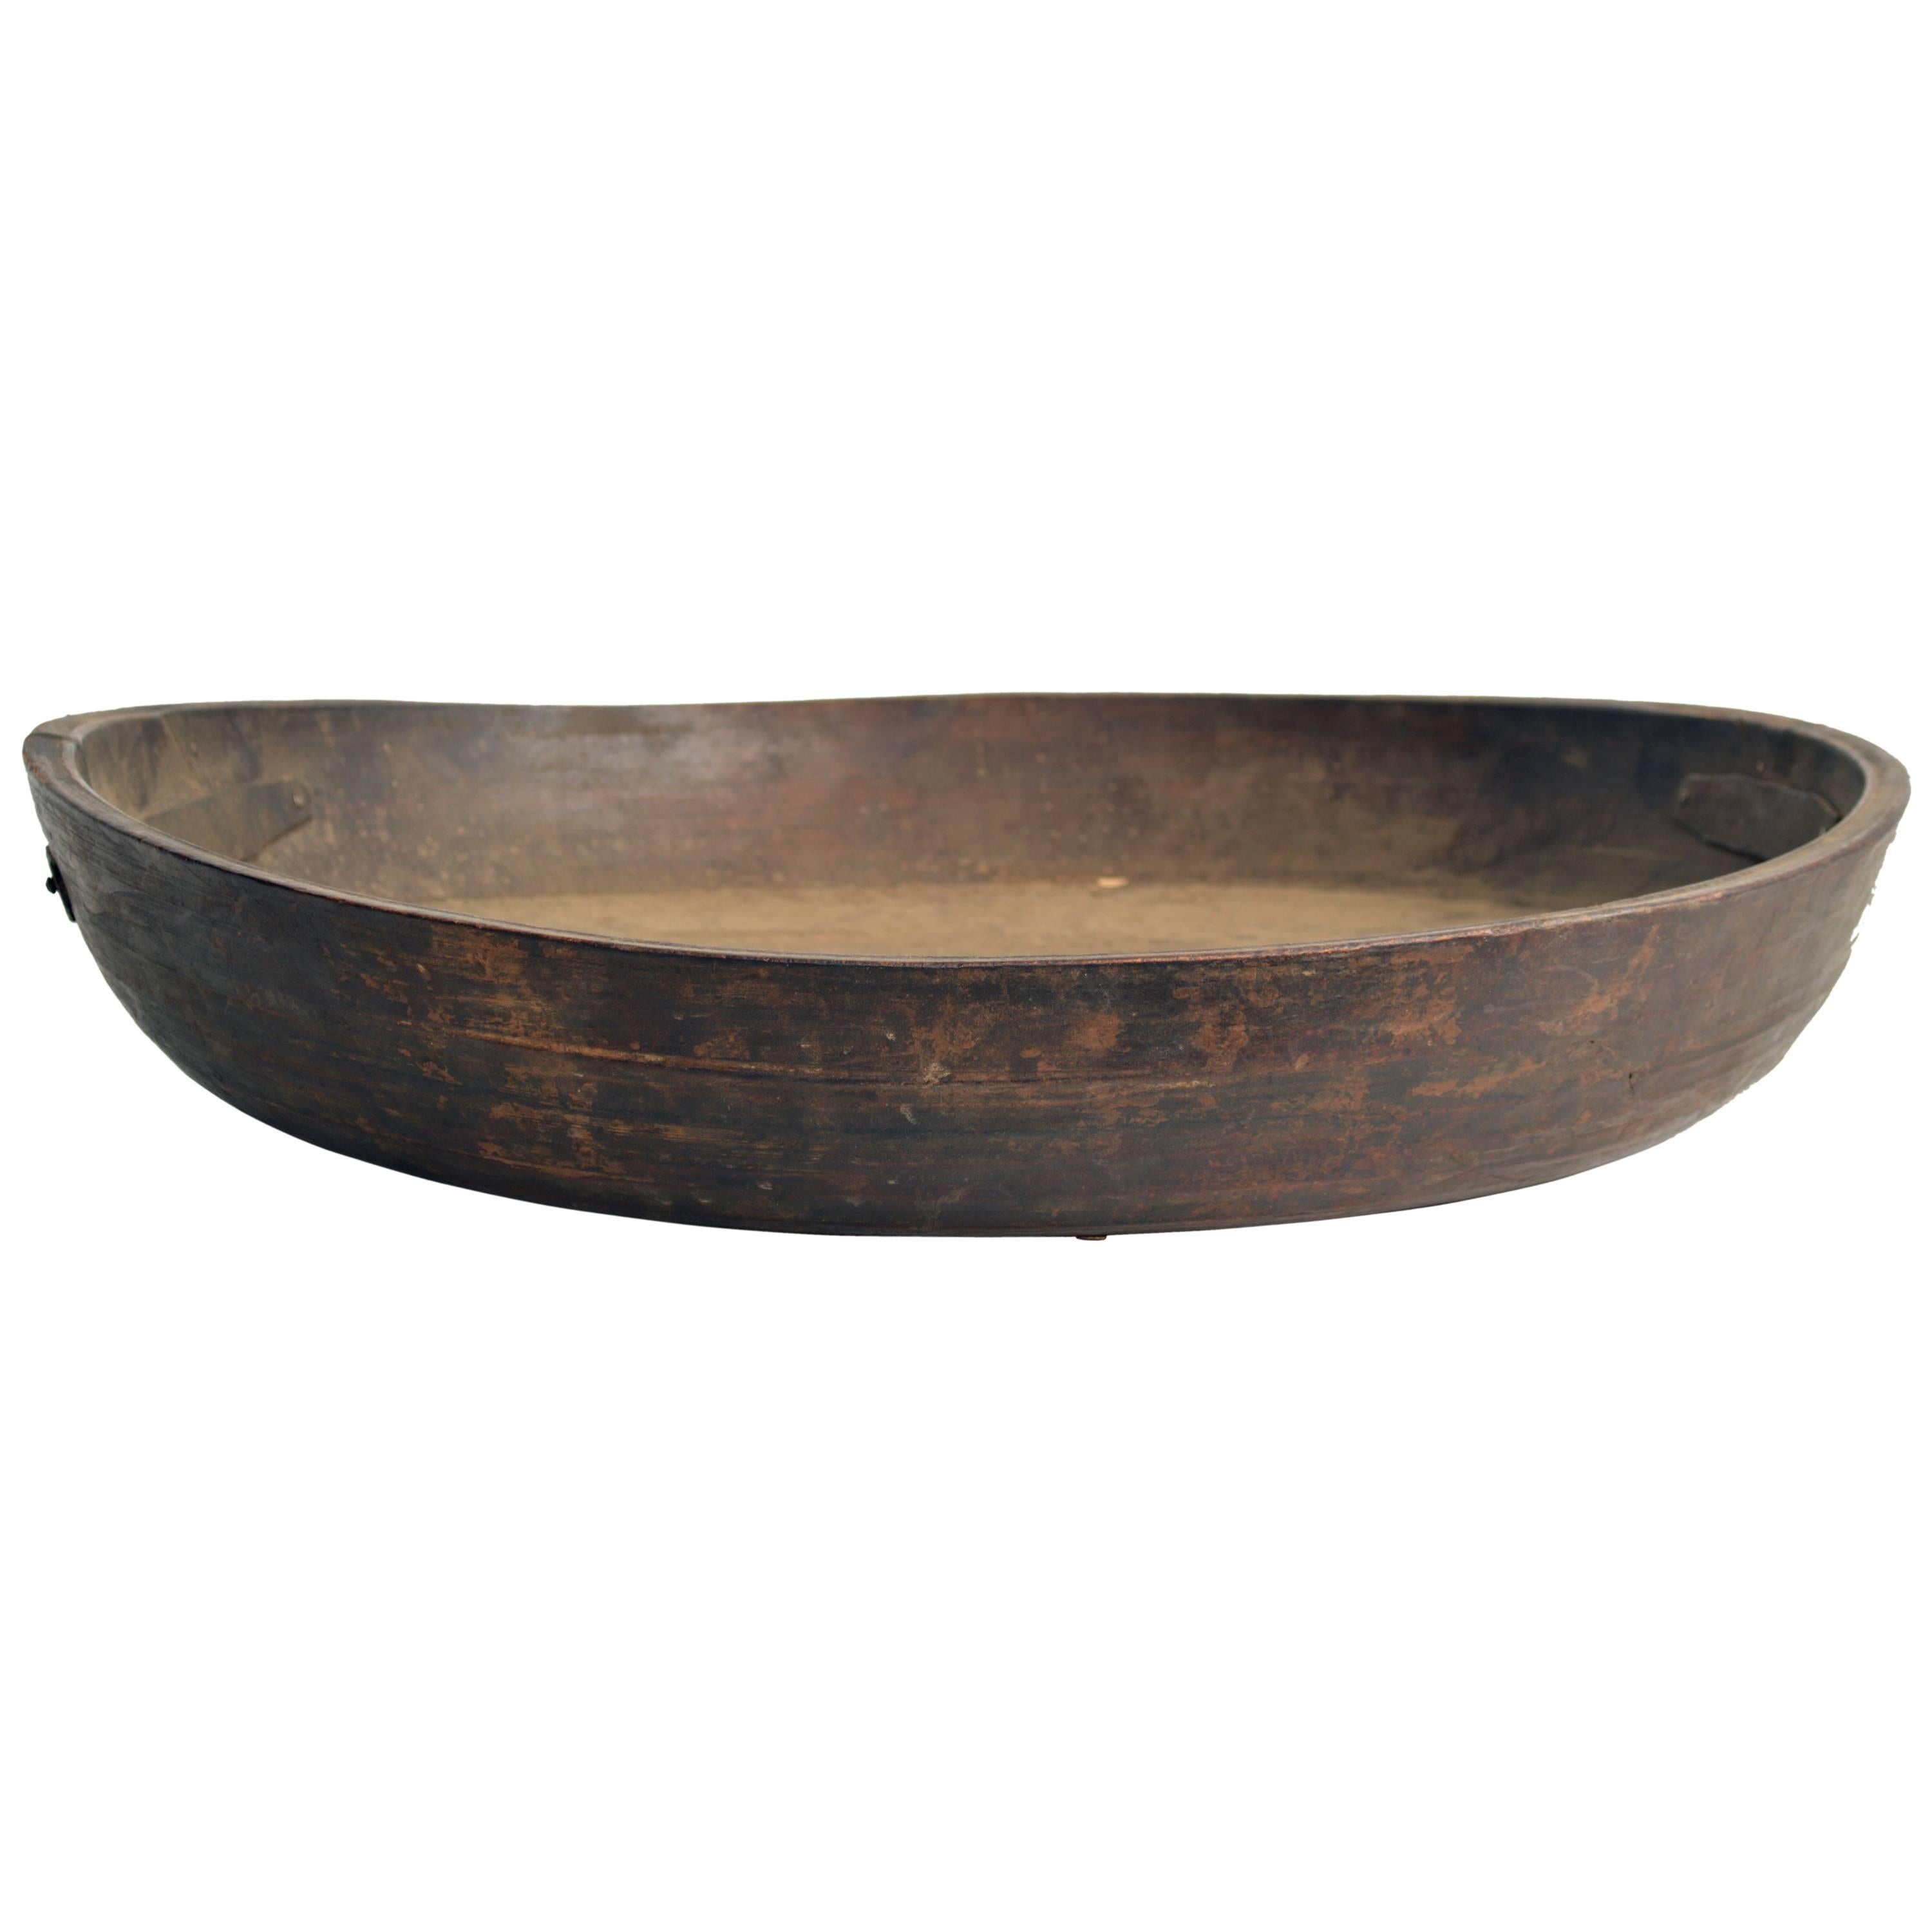 Large Carved Wood Bowl From Iran